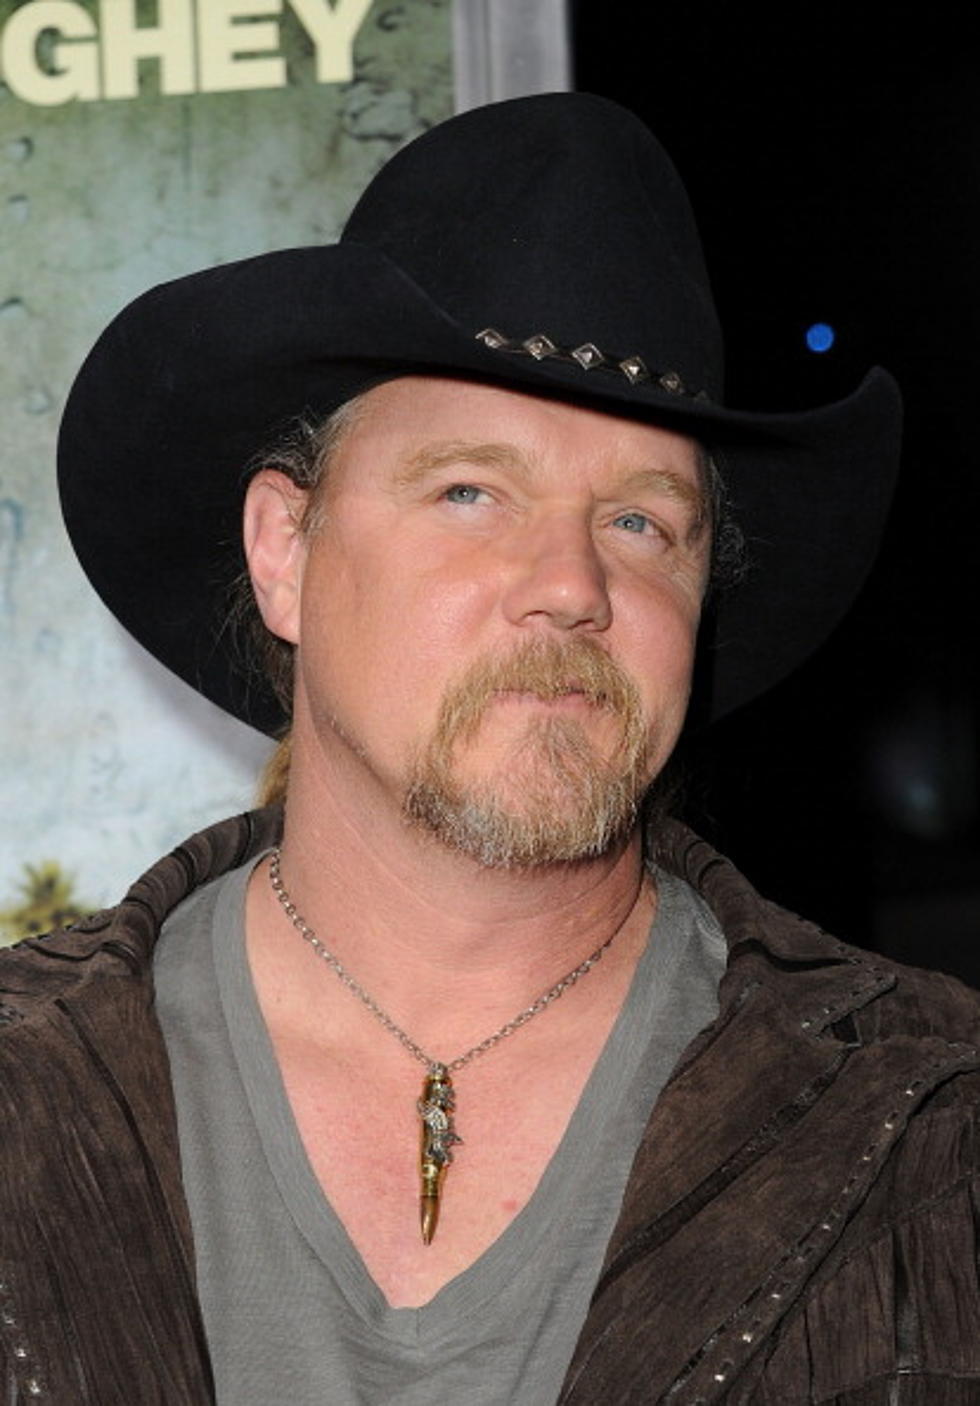 Gretchen Wilson, Trace Adkins, Steve Wariner – Today In Country Music History